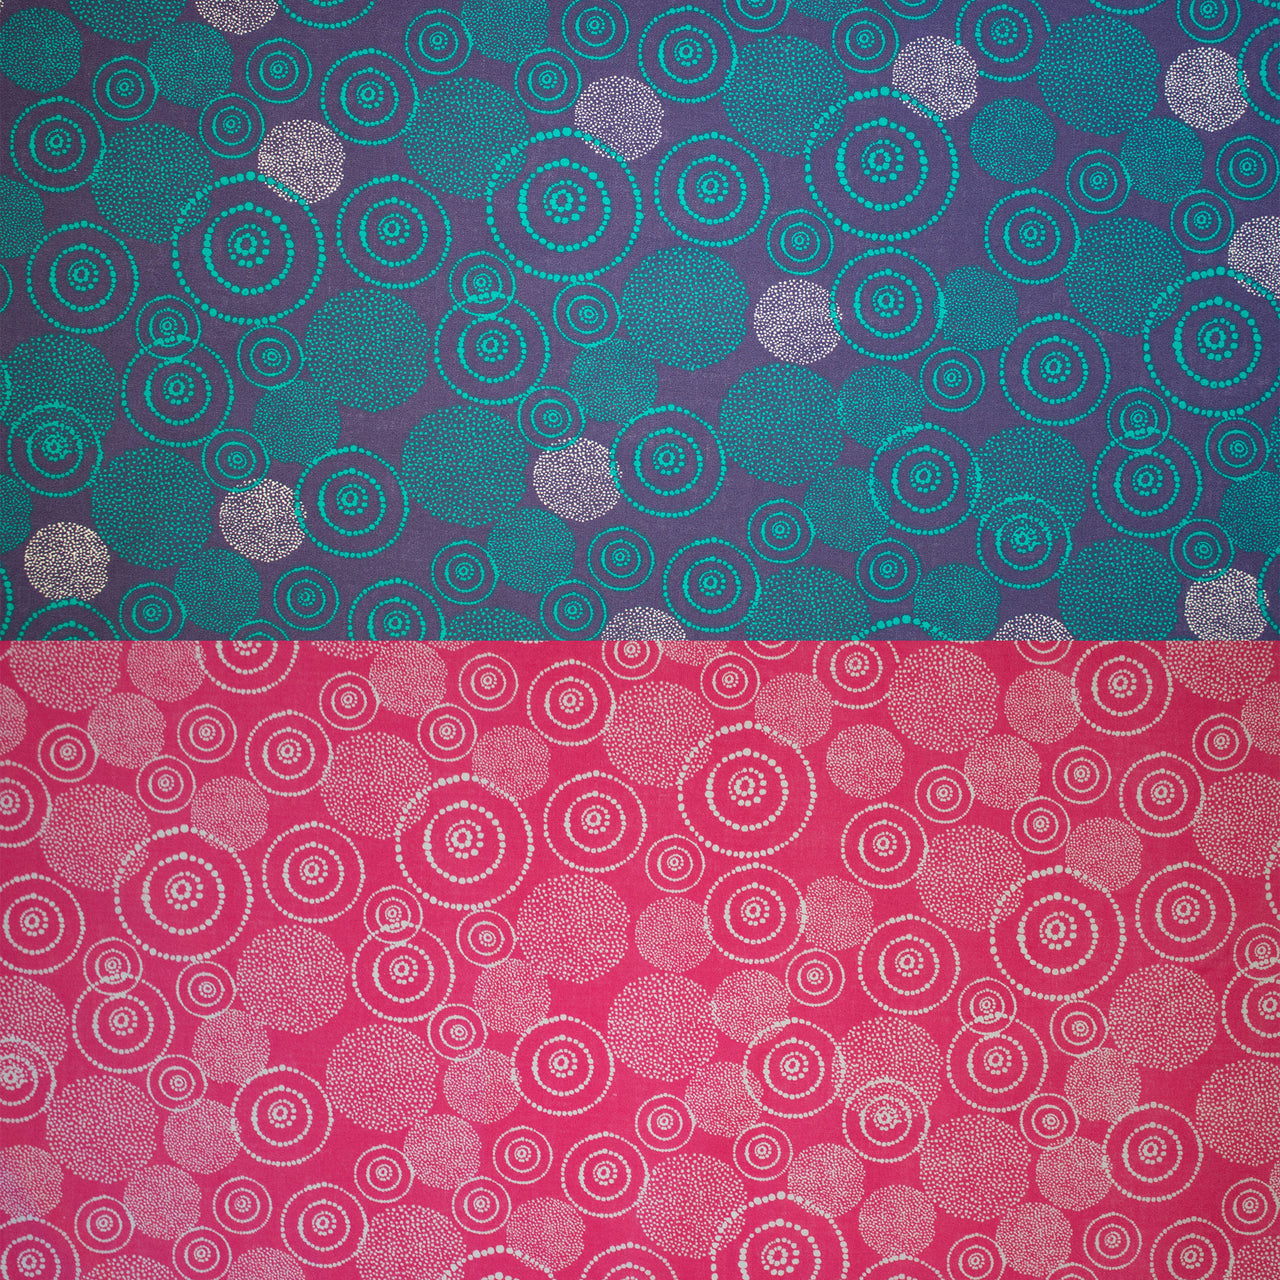 Geometric Circle Design on Printed Cotton Fabric - Available in Pink and Purple